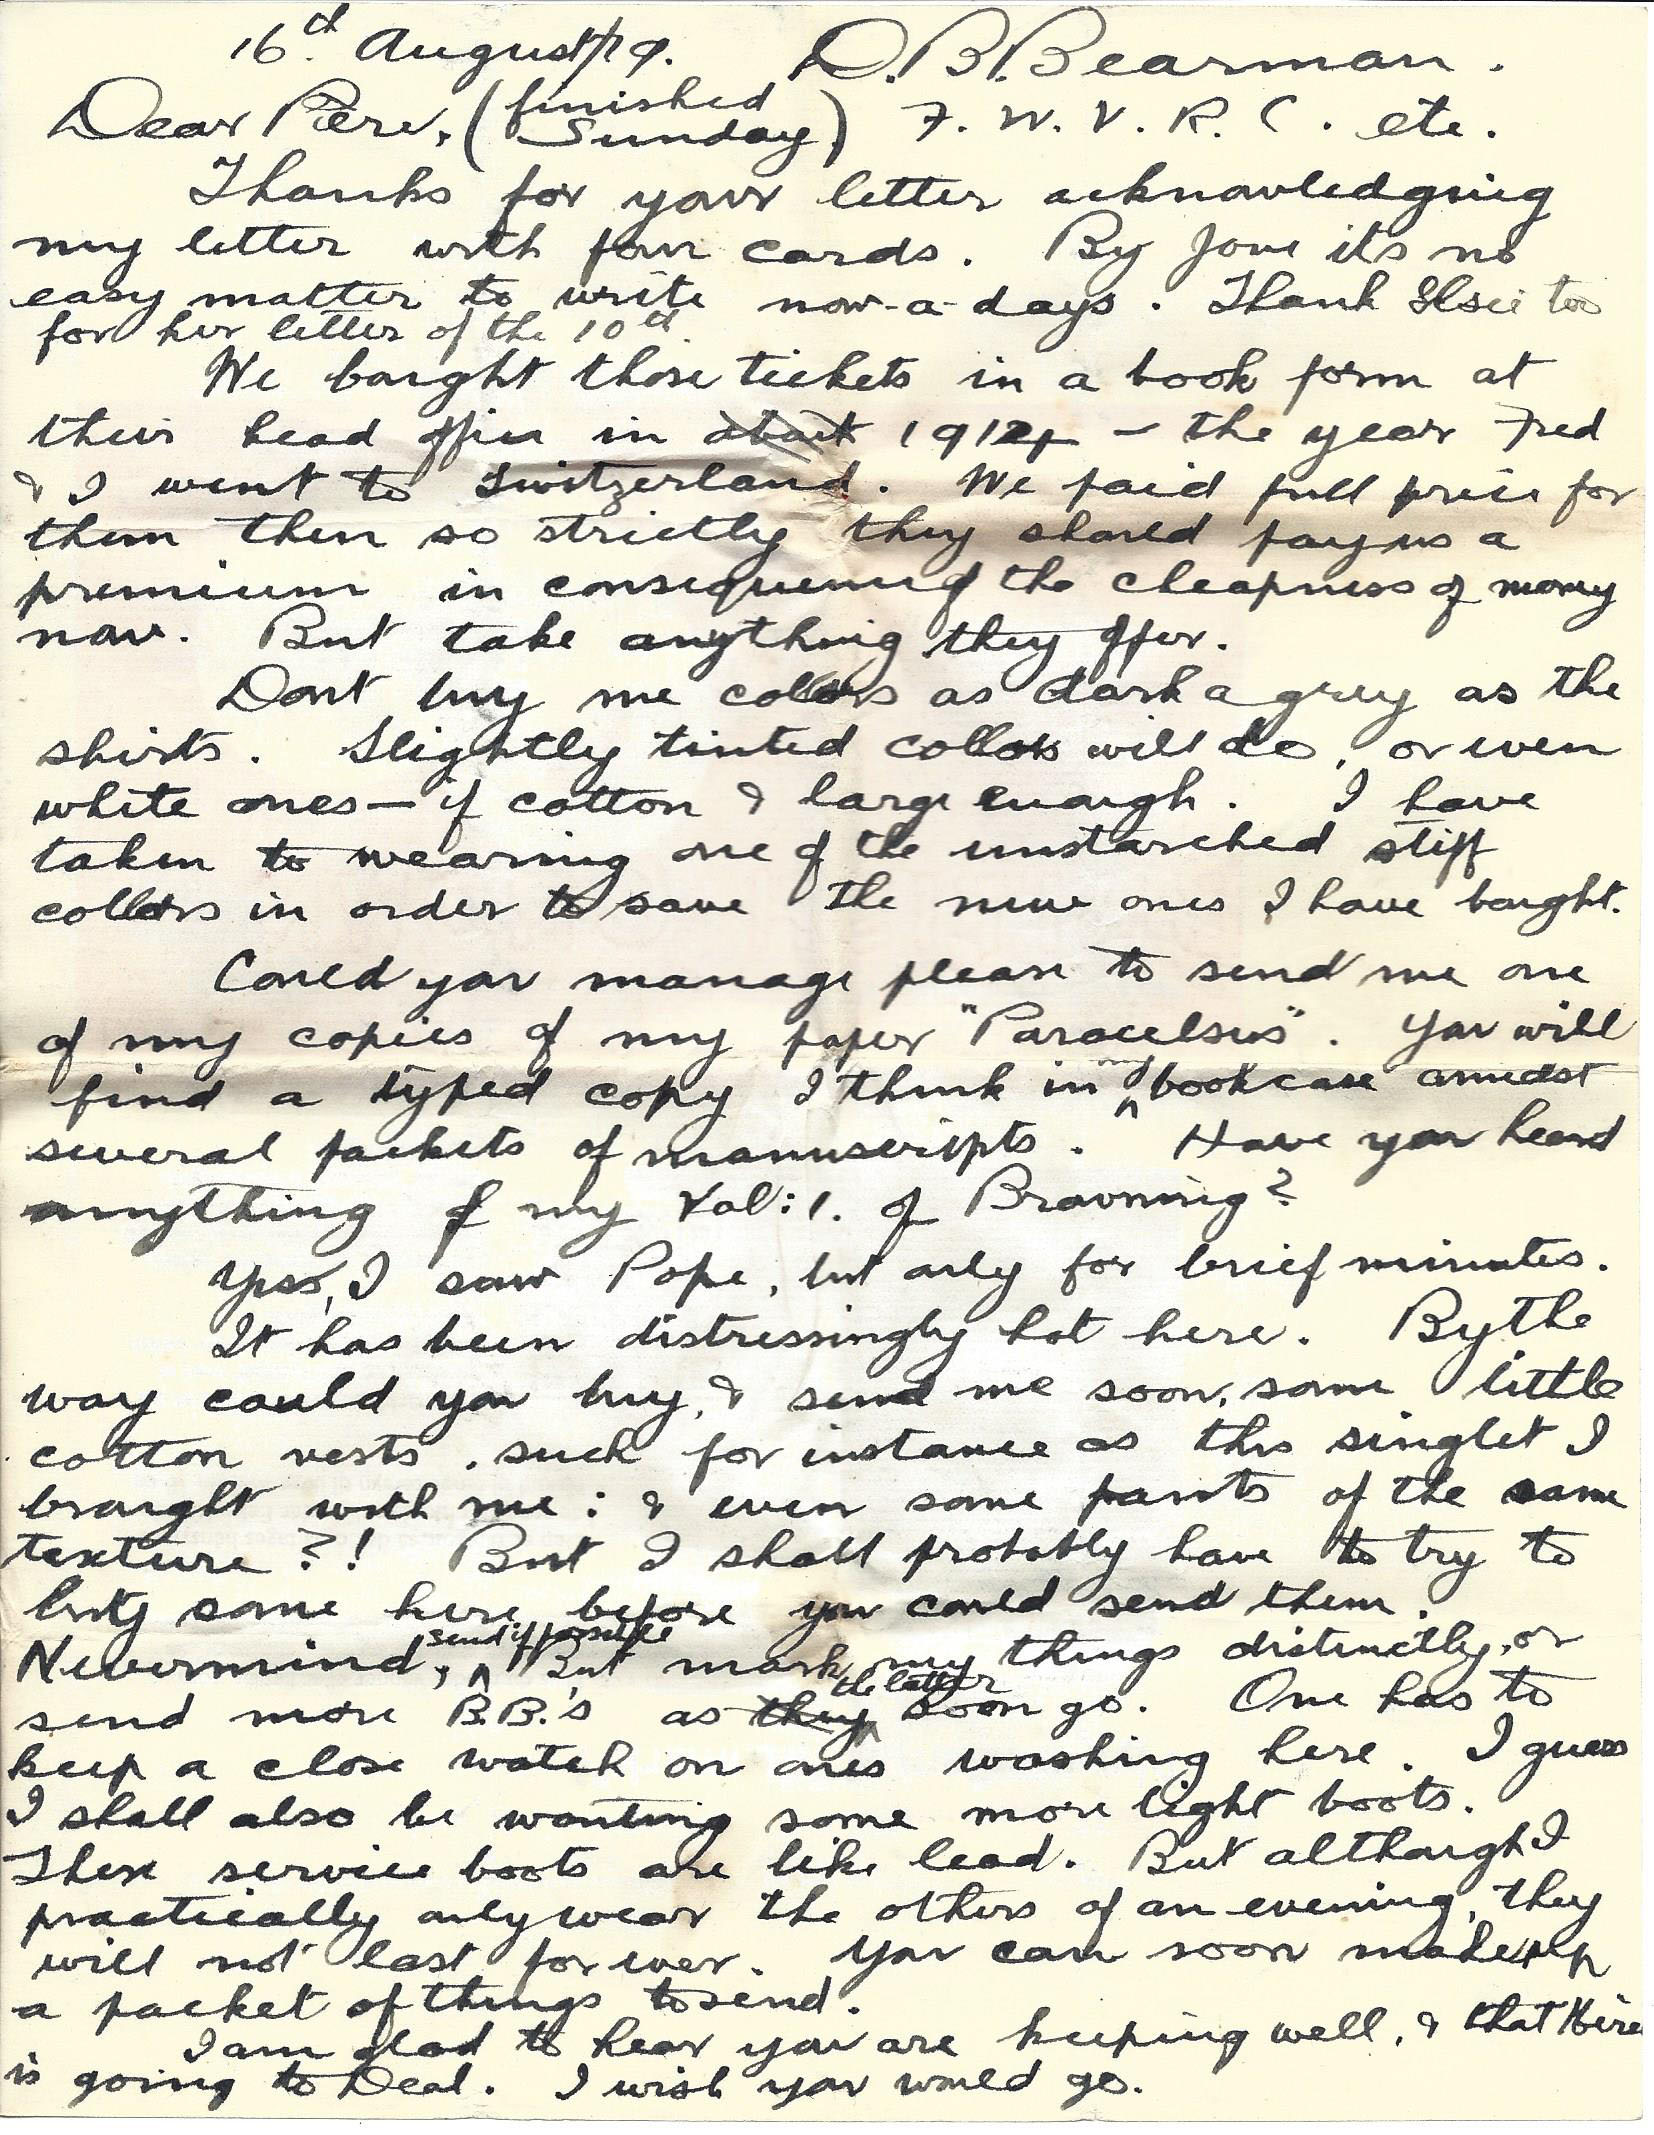 1919-08-16 p1 Donald Bearman letter to his father